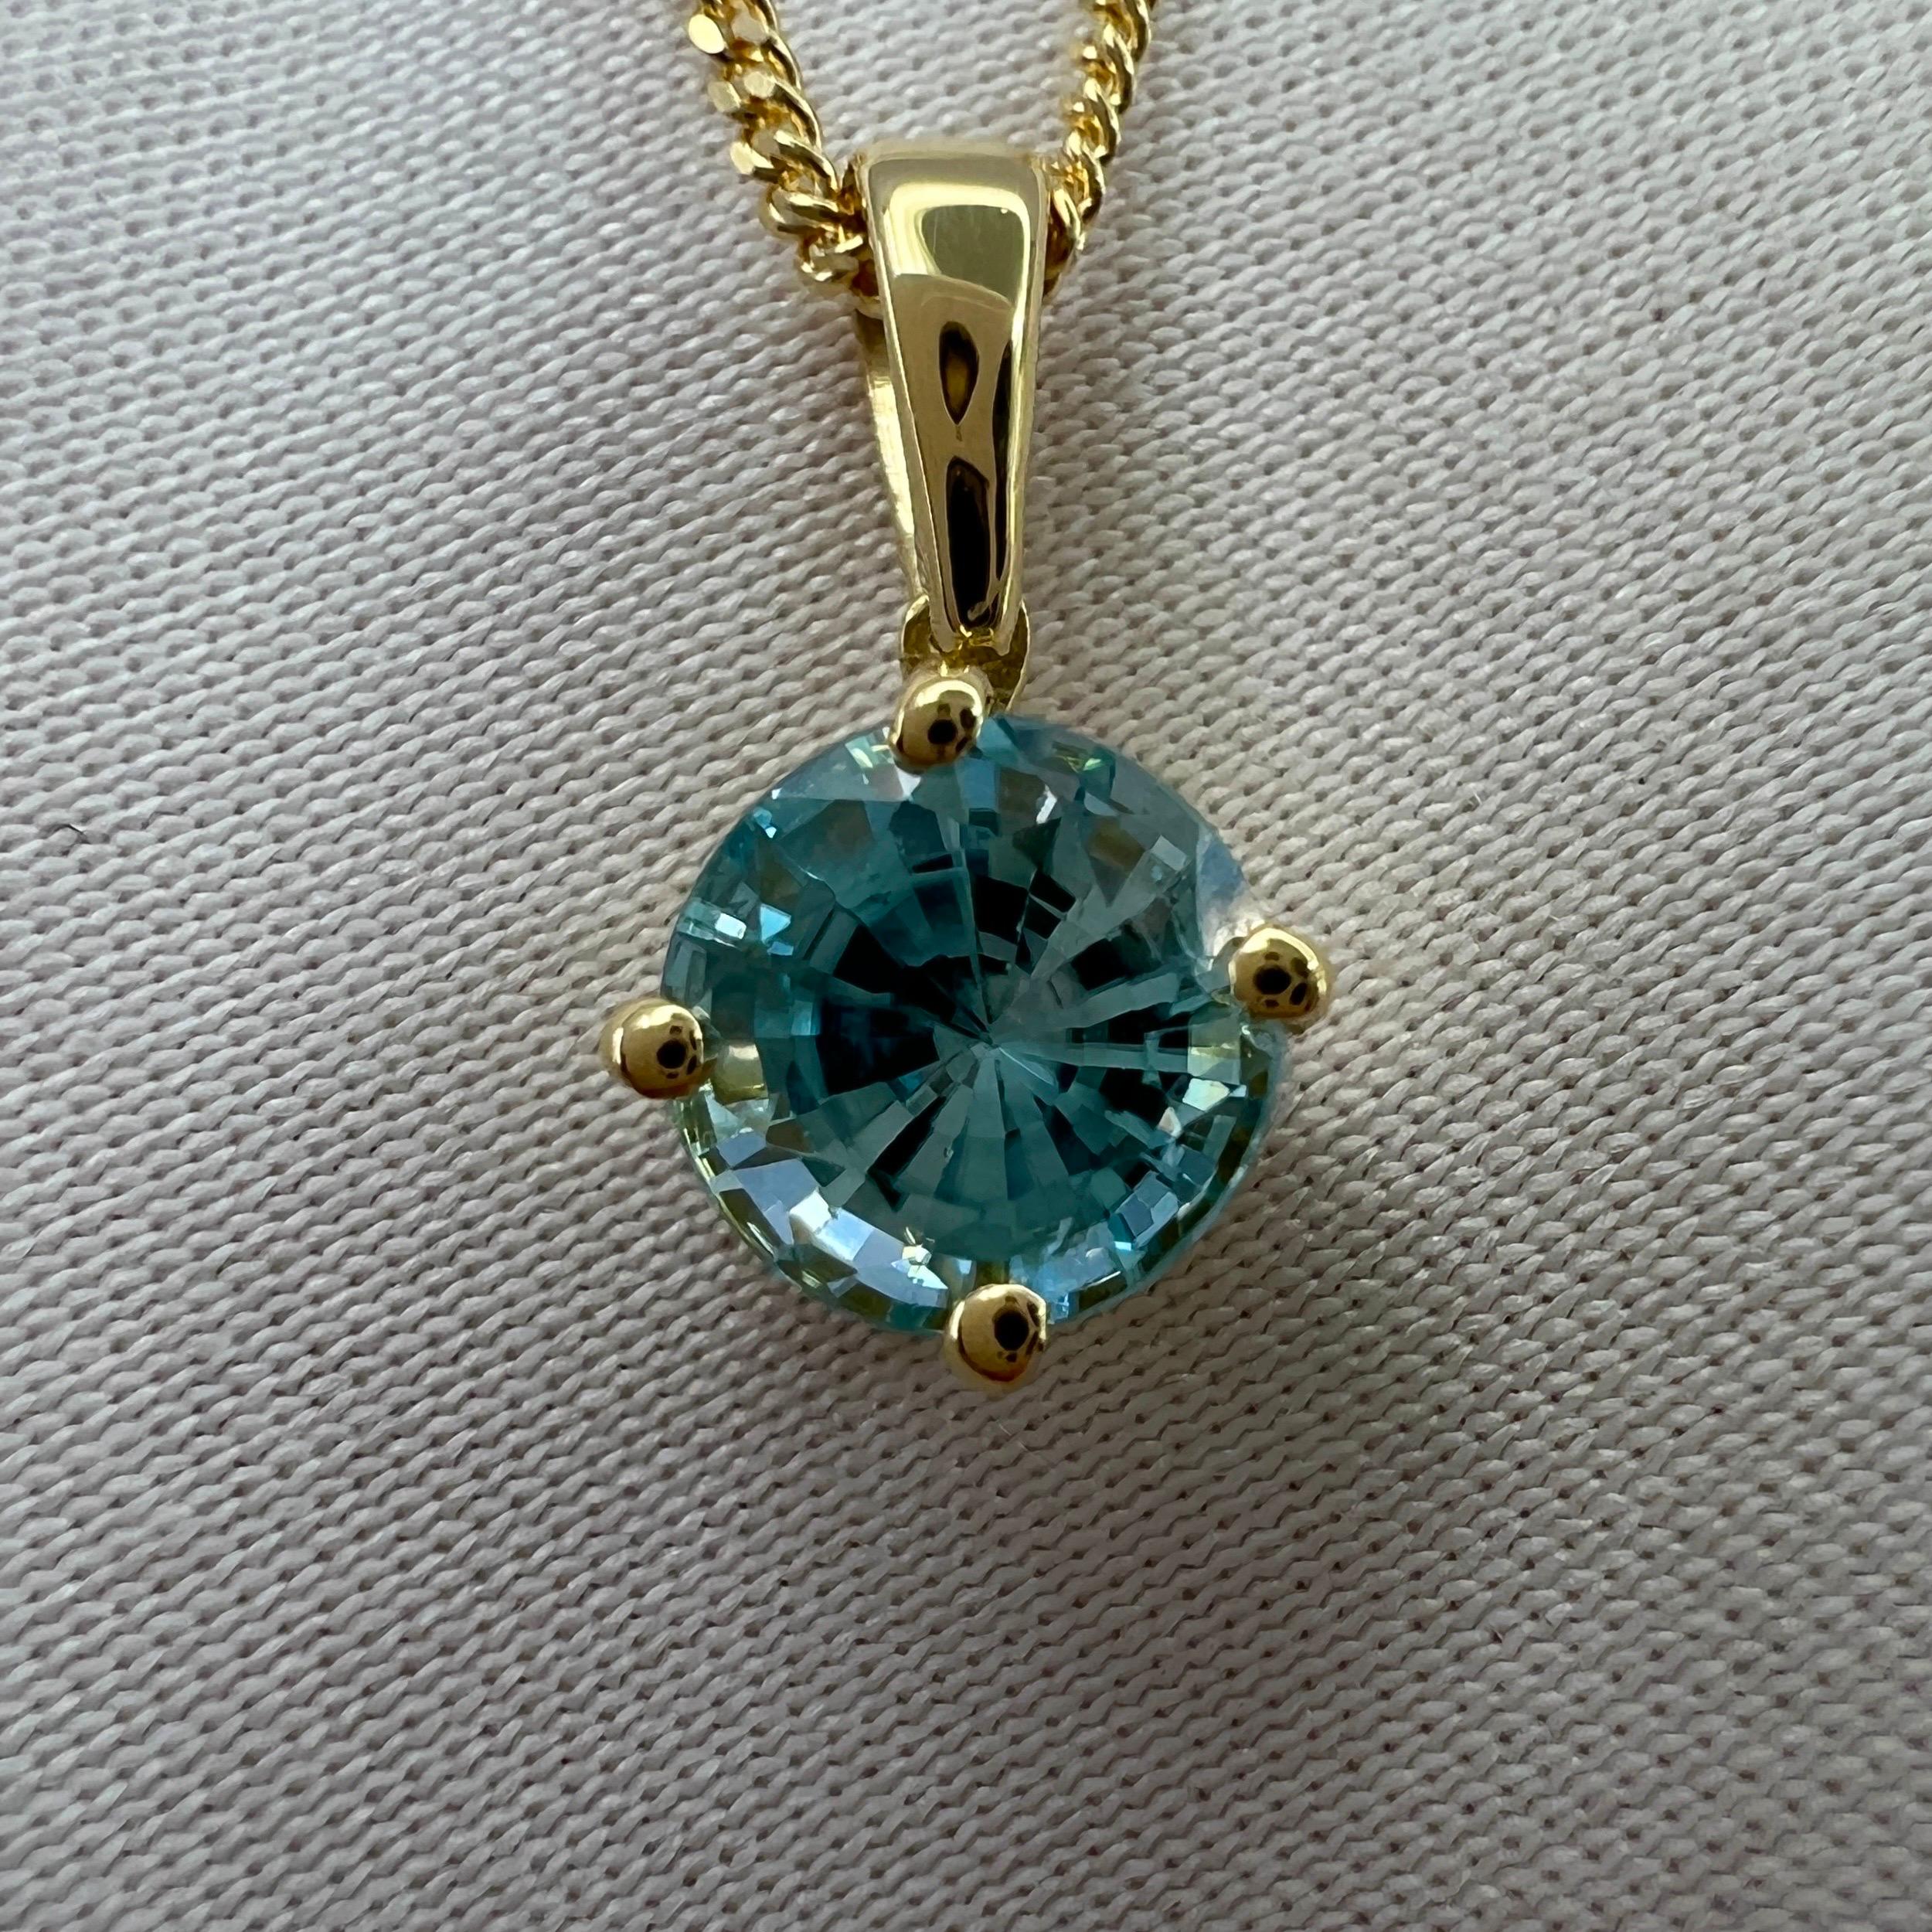 Vivid Neon Blue Natural Zircon Round Cut 18k Yellow Gold Pendant Necklace.

Beautiful natural 1.20 carat blue zircon set in a fine 18k yellow gold solitaire pendant. Stunning blue zircon with a vivid neon blue colour and excellent clarity, very